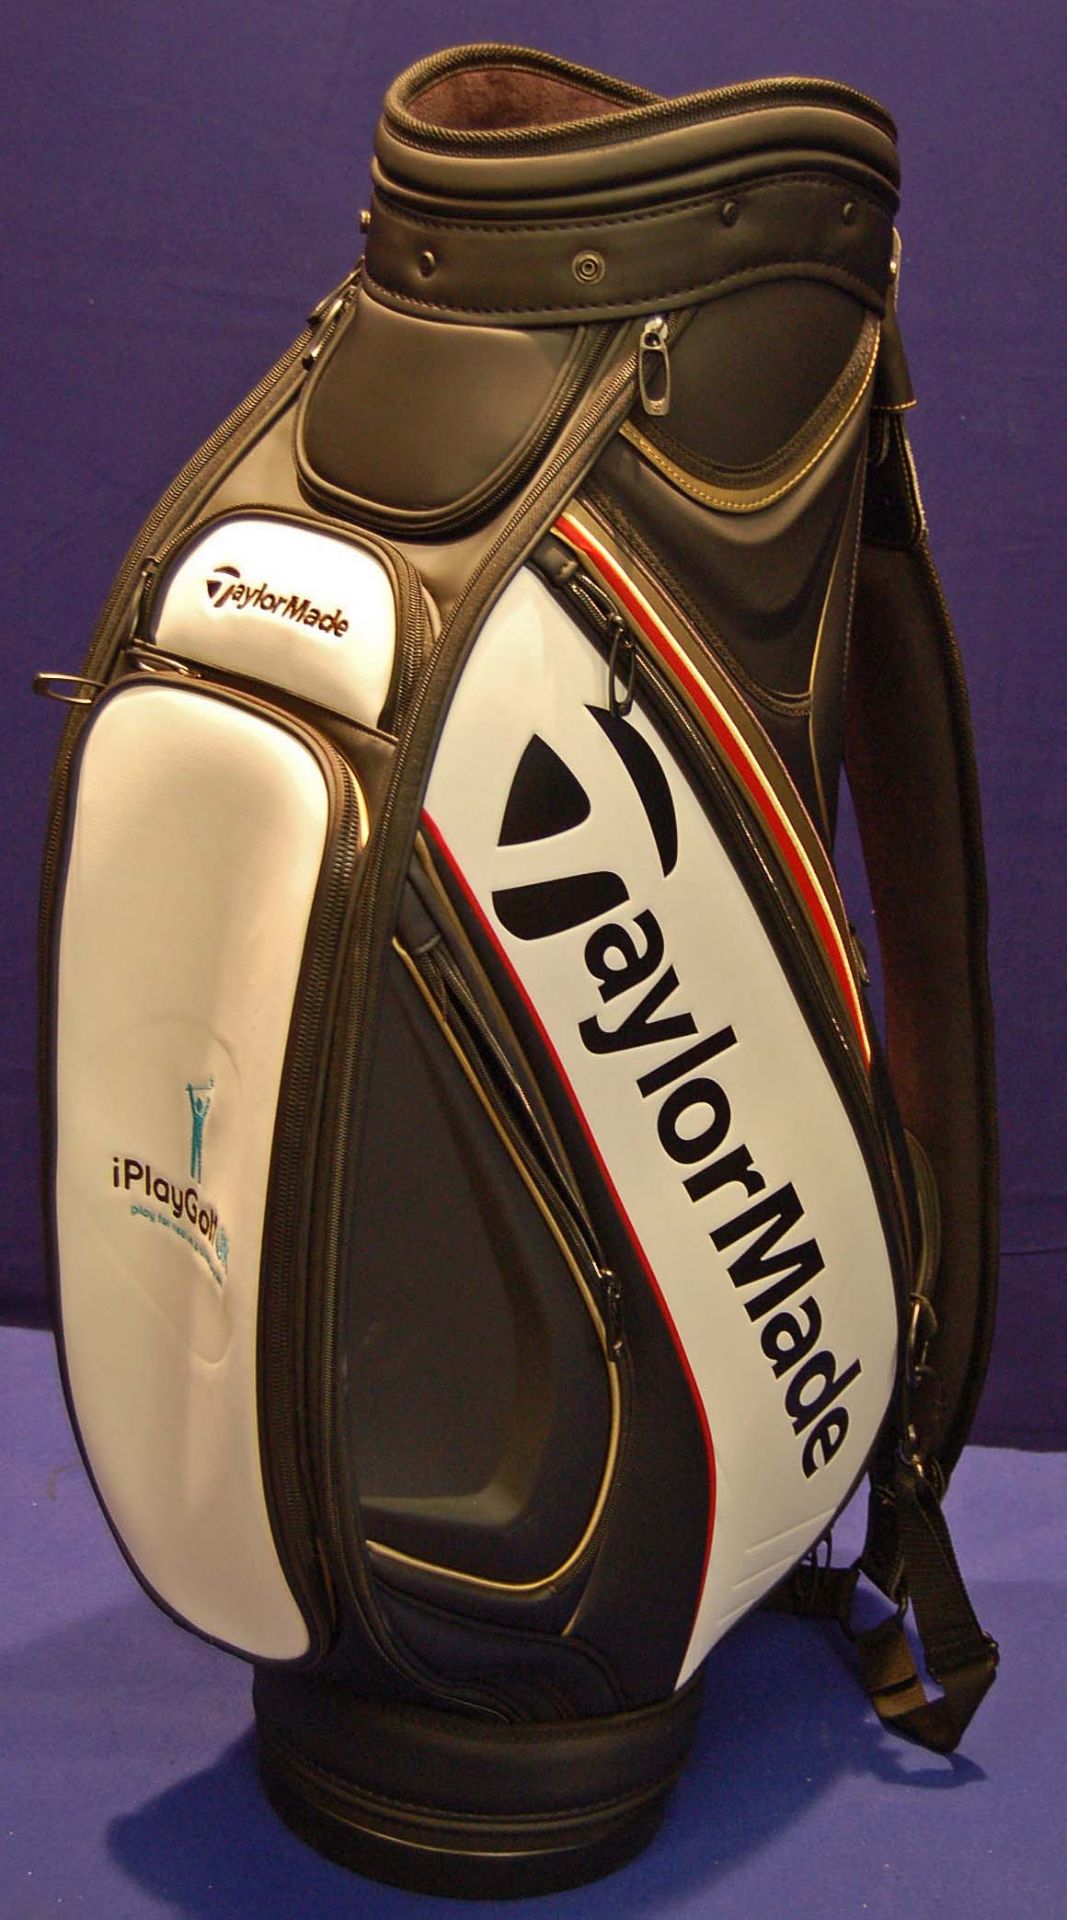 A TAYLORMADE TM16 Tour Cart Golf Bag in Black/White/Red/Gold featuring 6-Way Velour Top (8.5 inch - Image 2 of 2